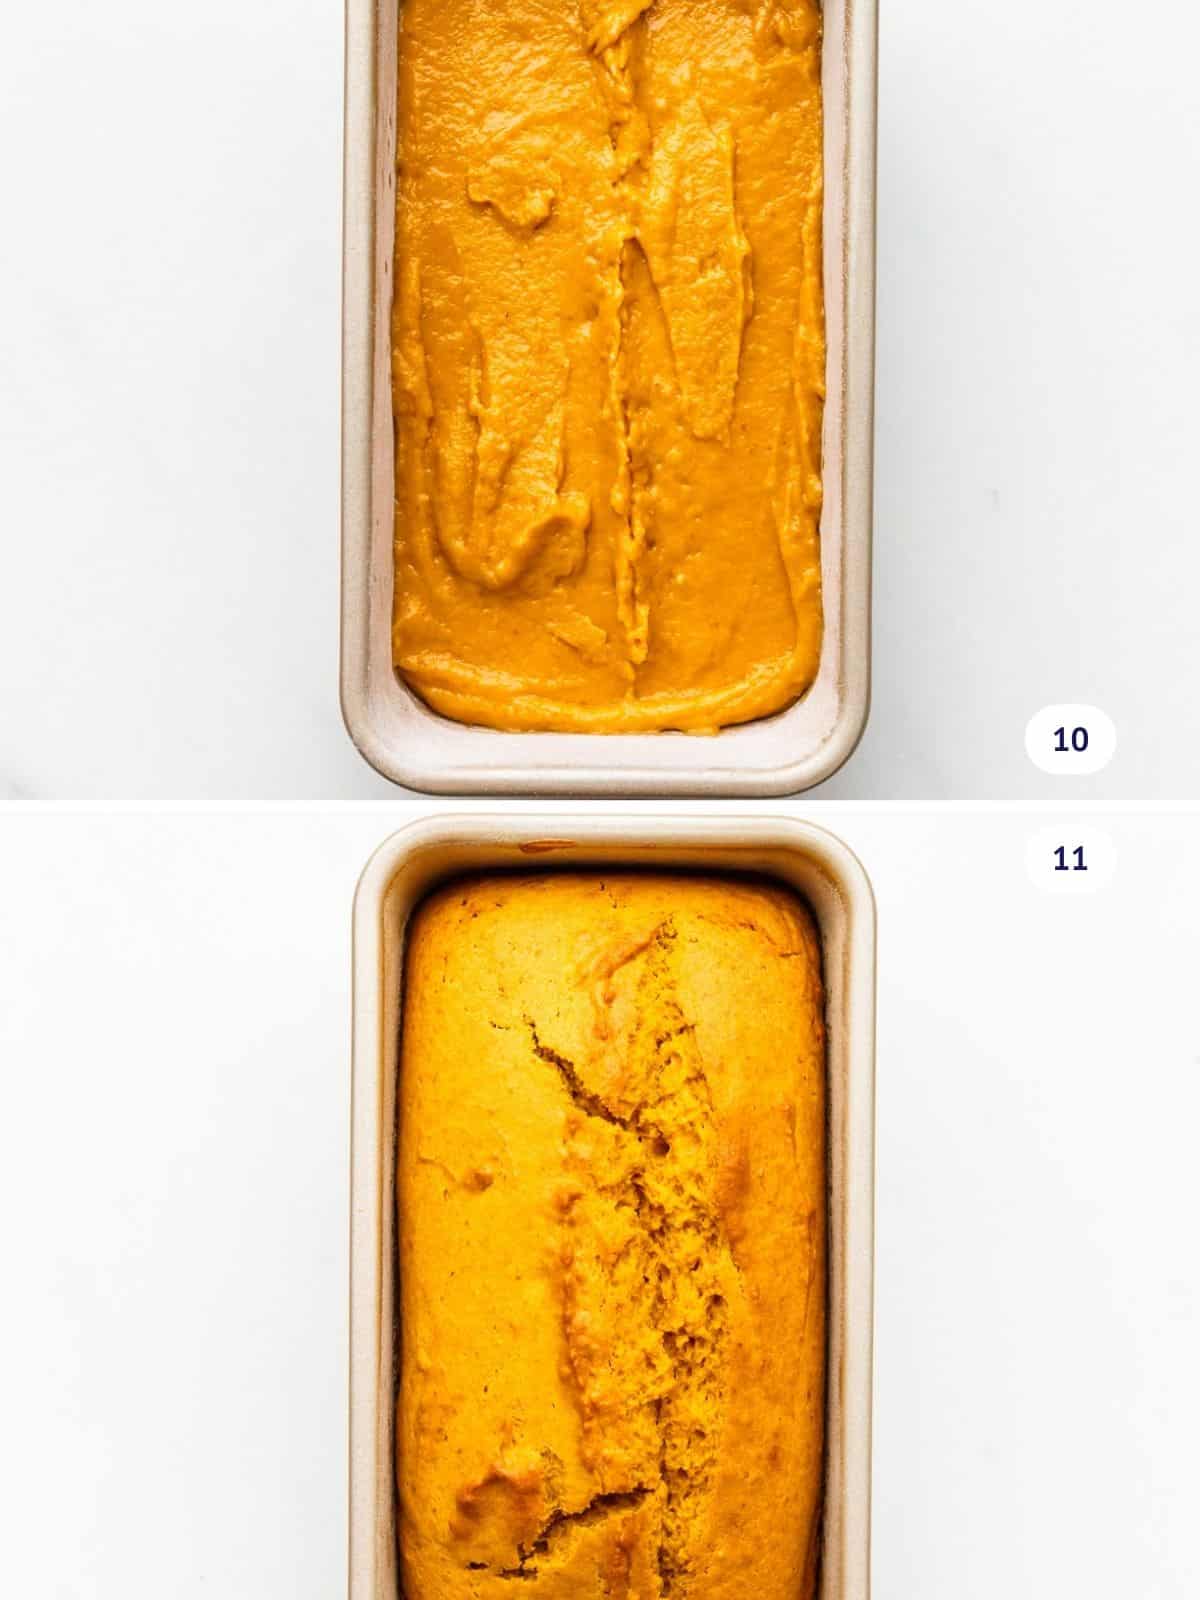 Pumpkin bread before and after baking.